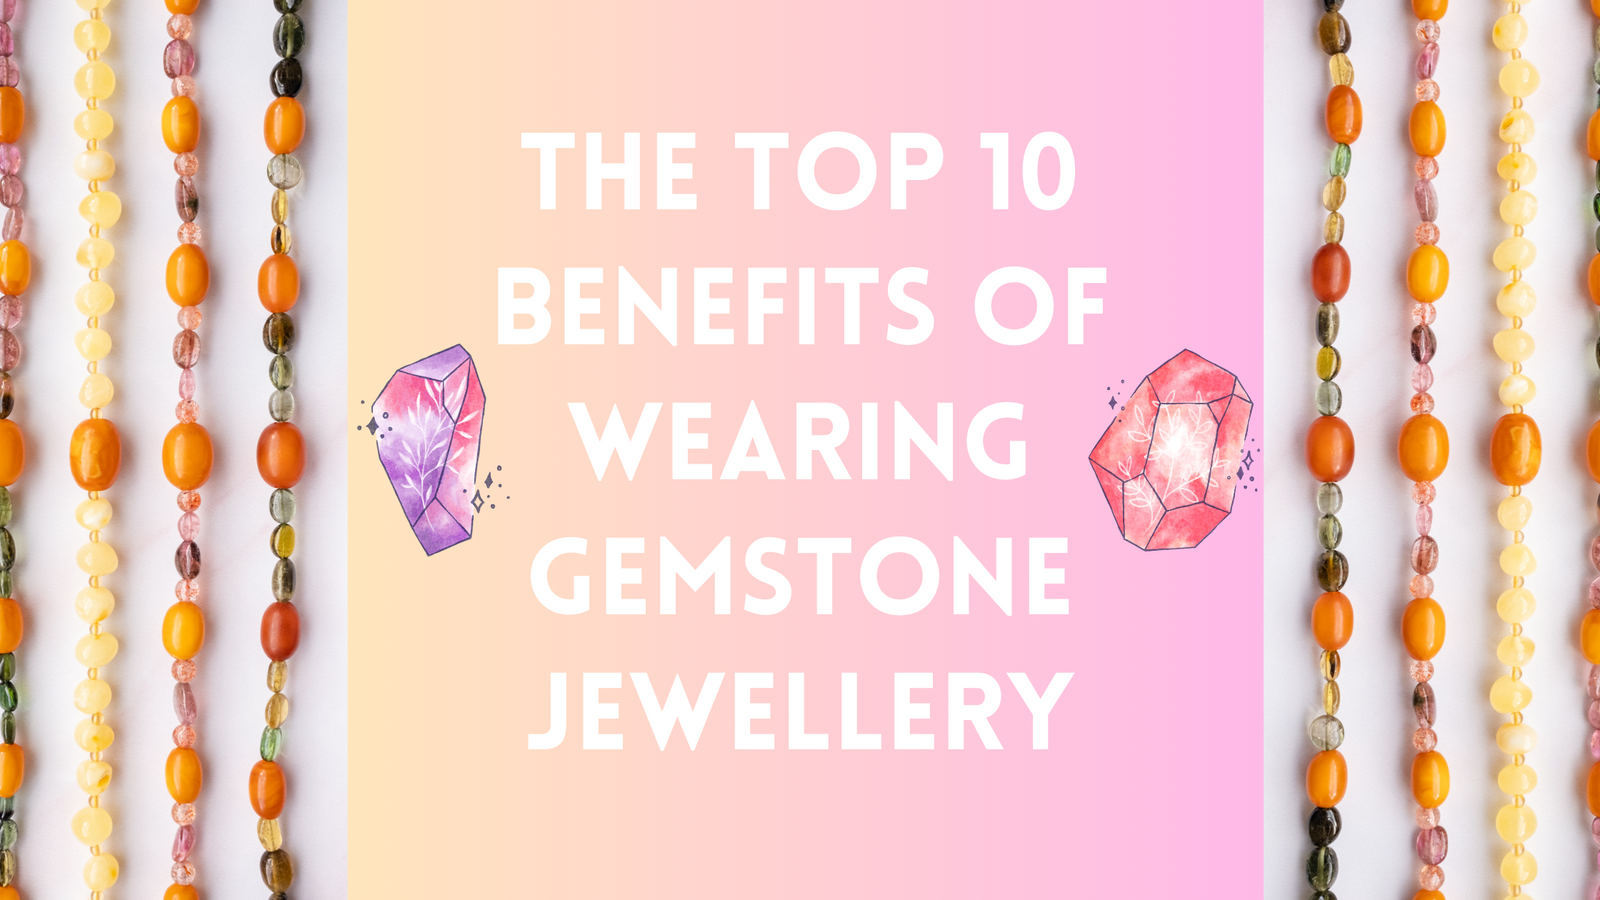 The Top 10 Benefits of Wearing Gemstone Jewellery – The Healing Pear